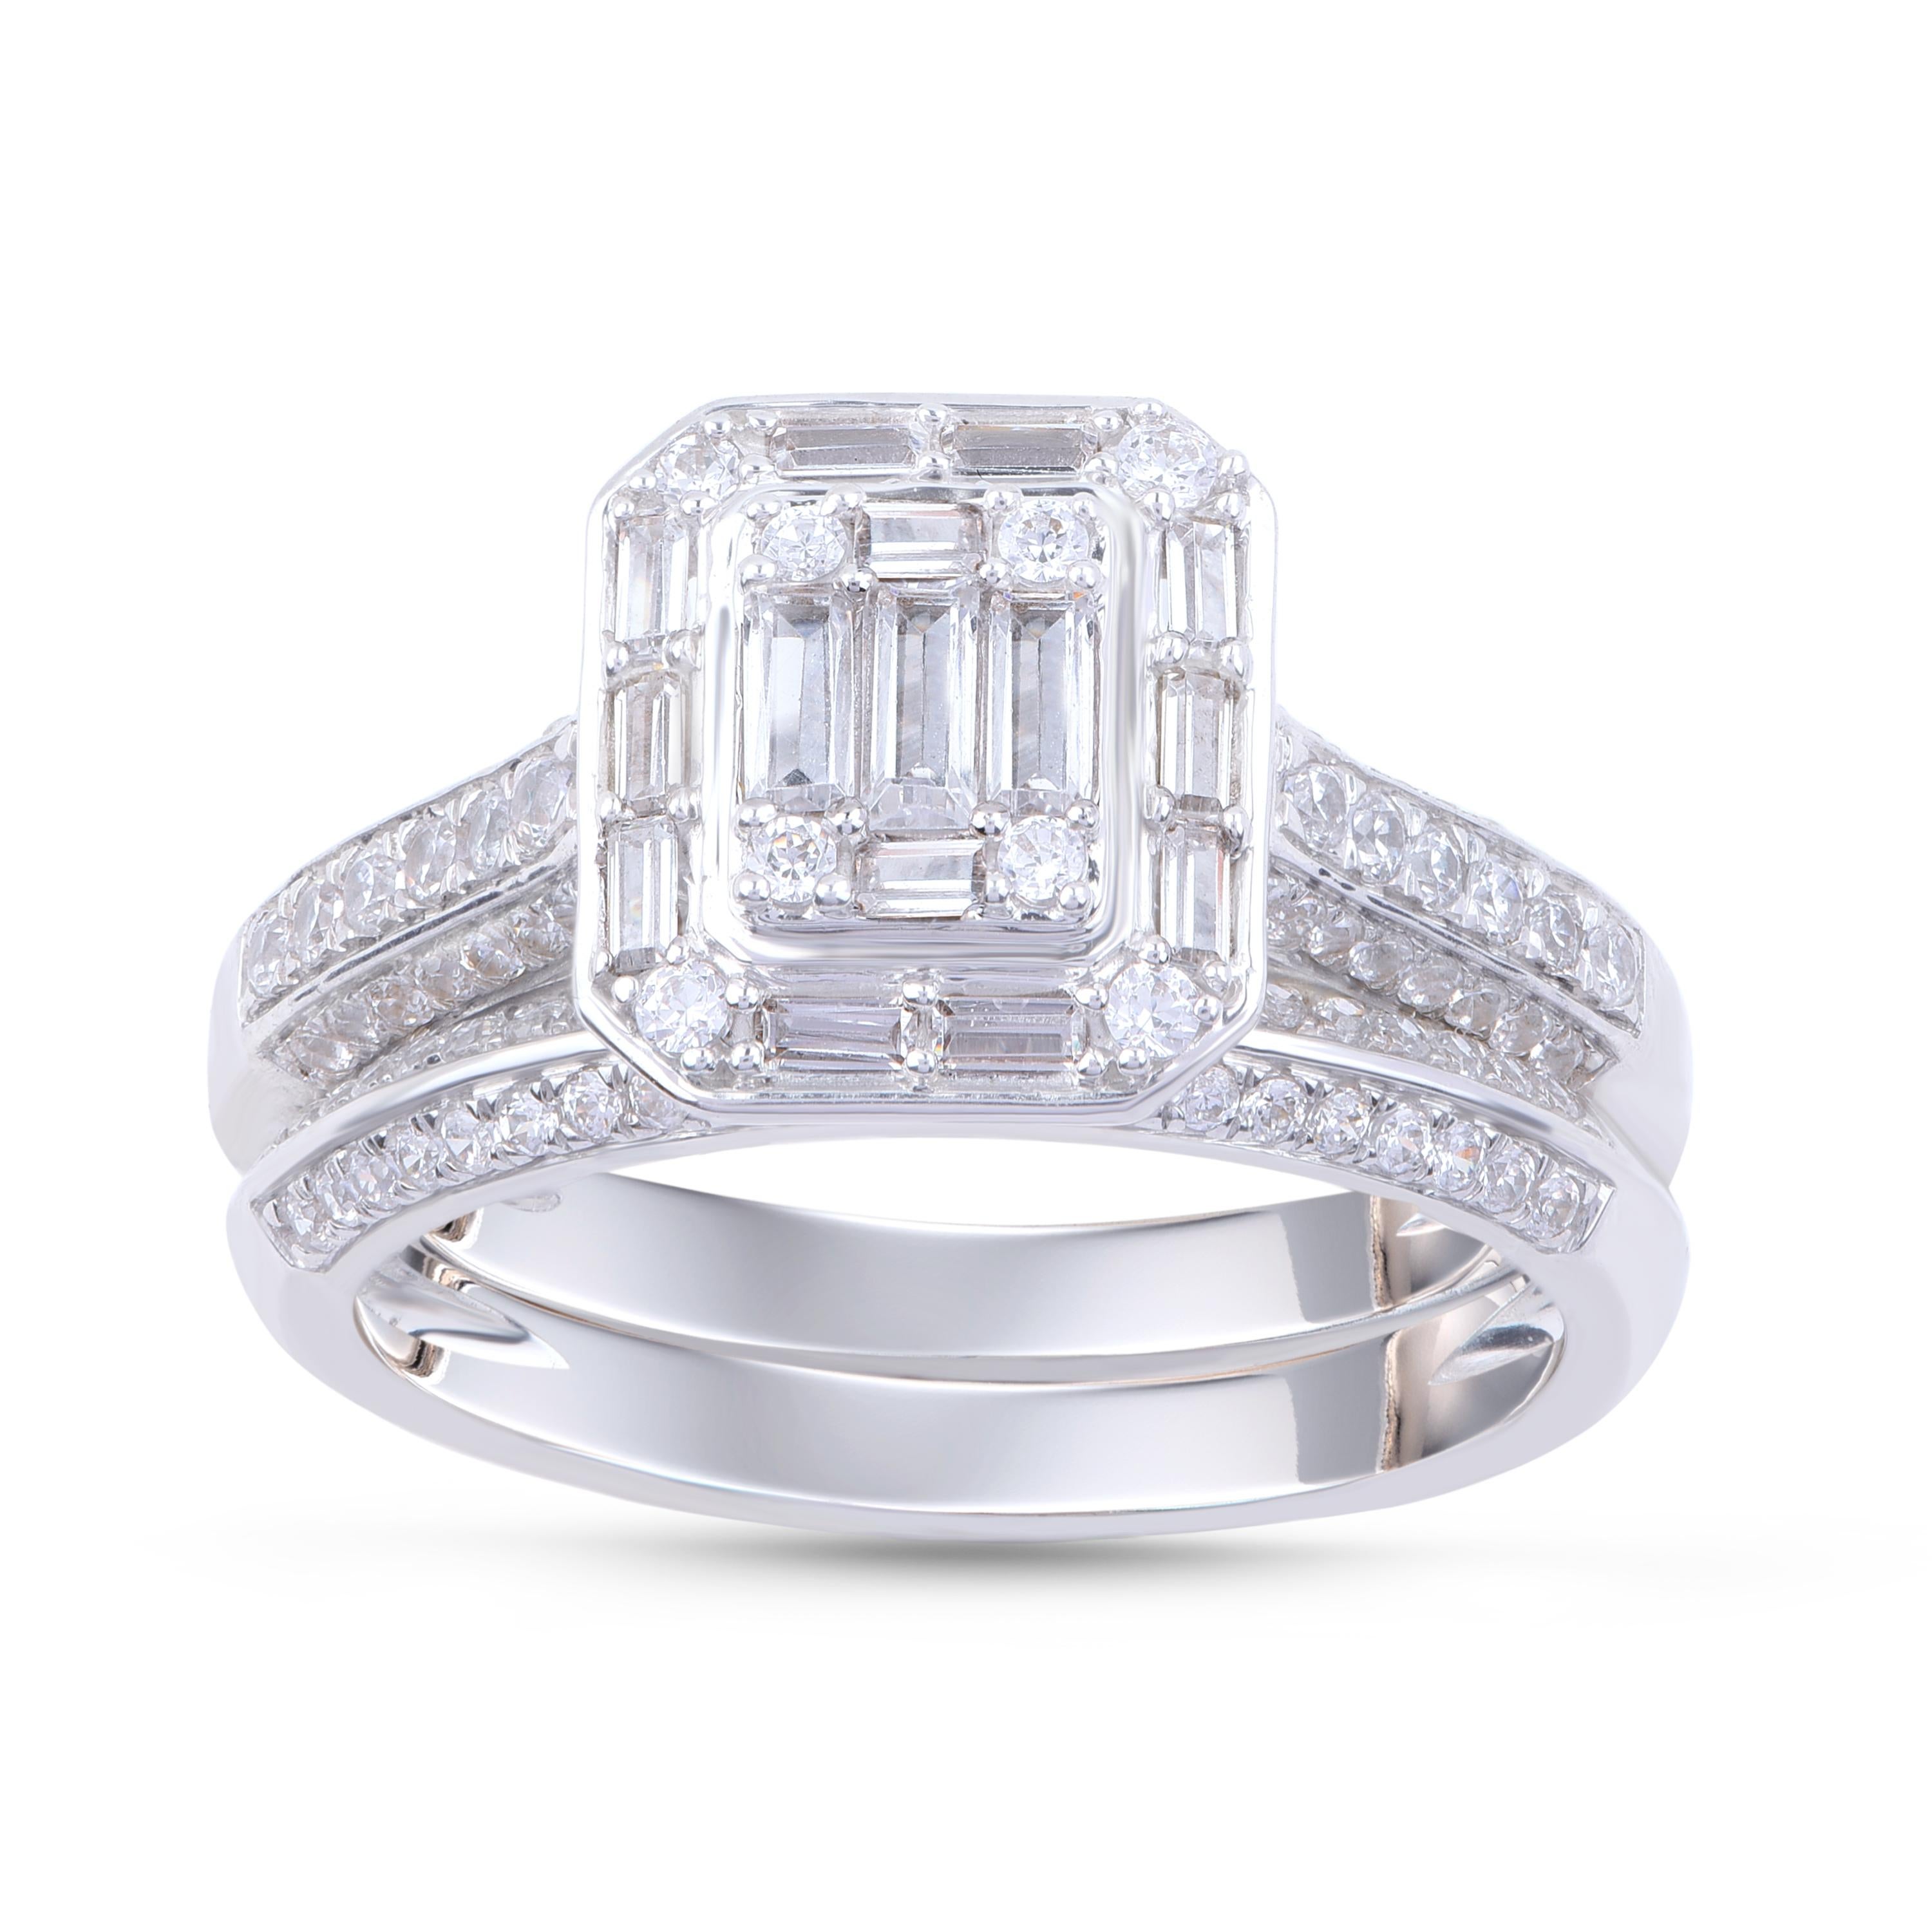 The beautiful and striking diamond engagement ring is studded with 94 brilliant cut diamonds and 15 baguettes. The diamonds are graded HI Color, I2 Clarity.